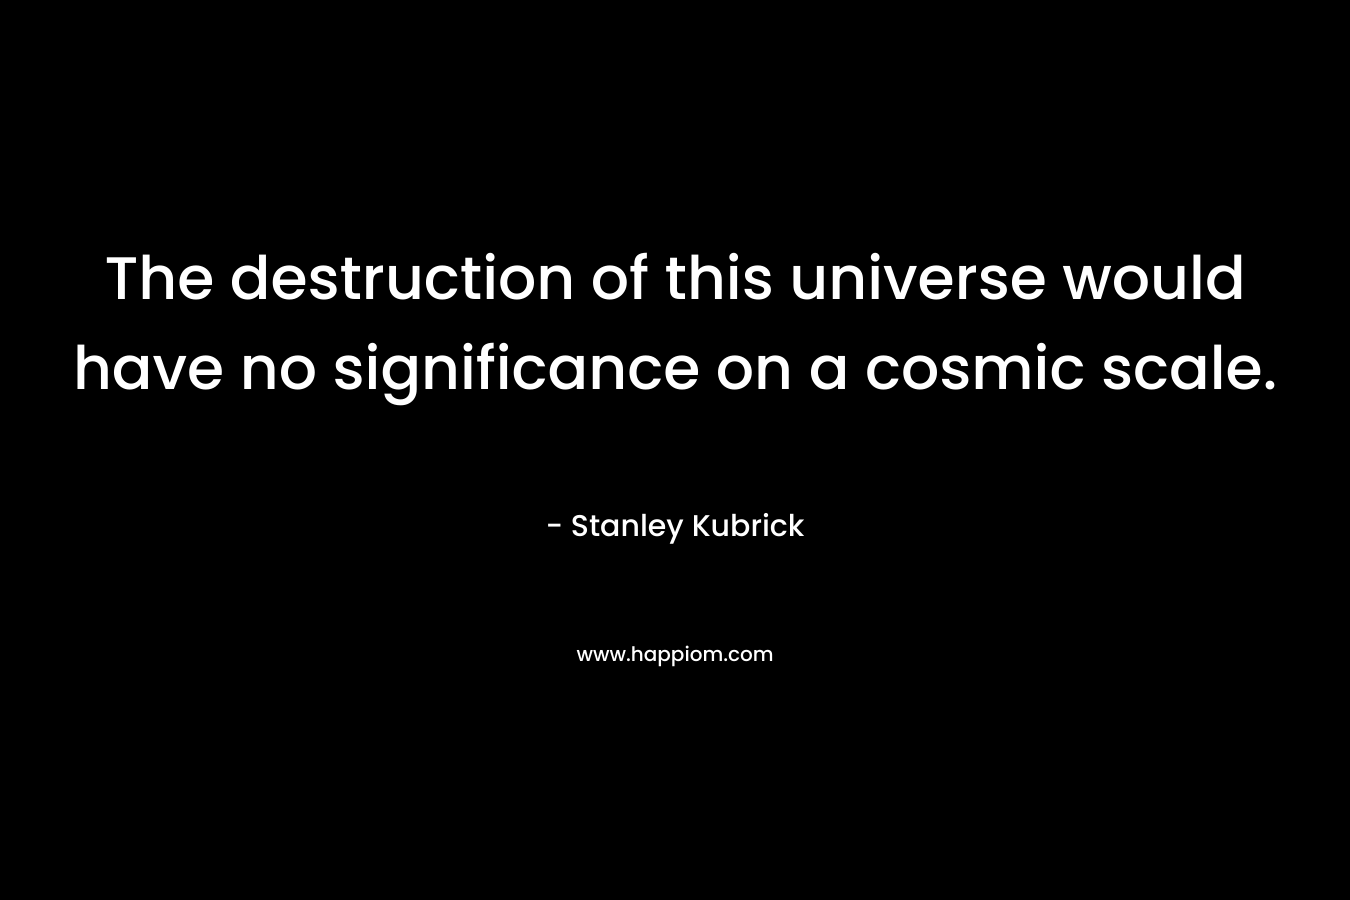 The destruction of this universe would have no significance on a cosmic scale. – Stanley Kubrick